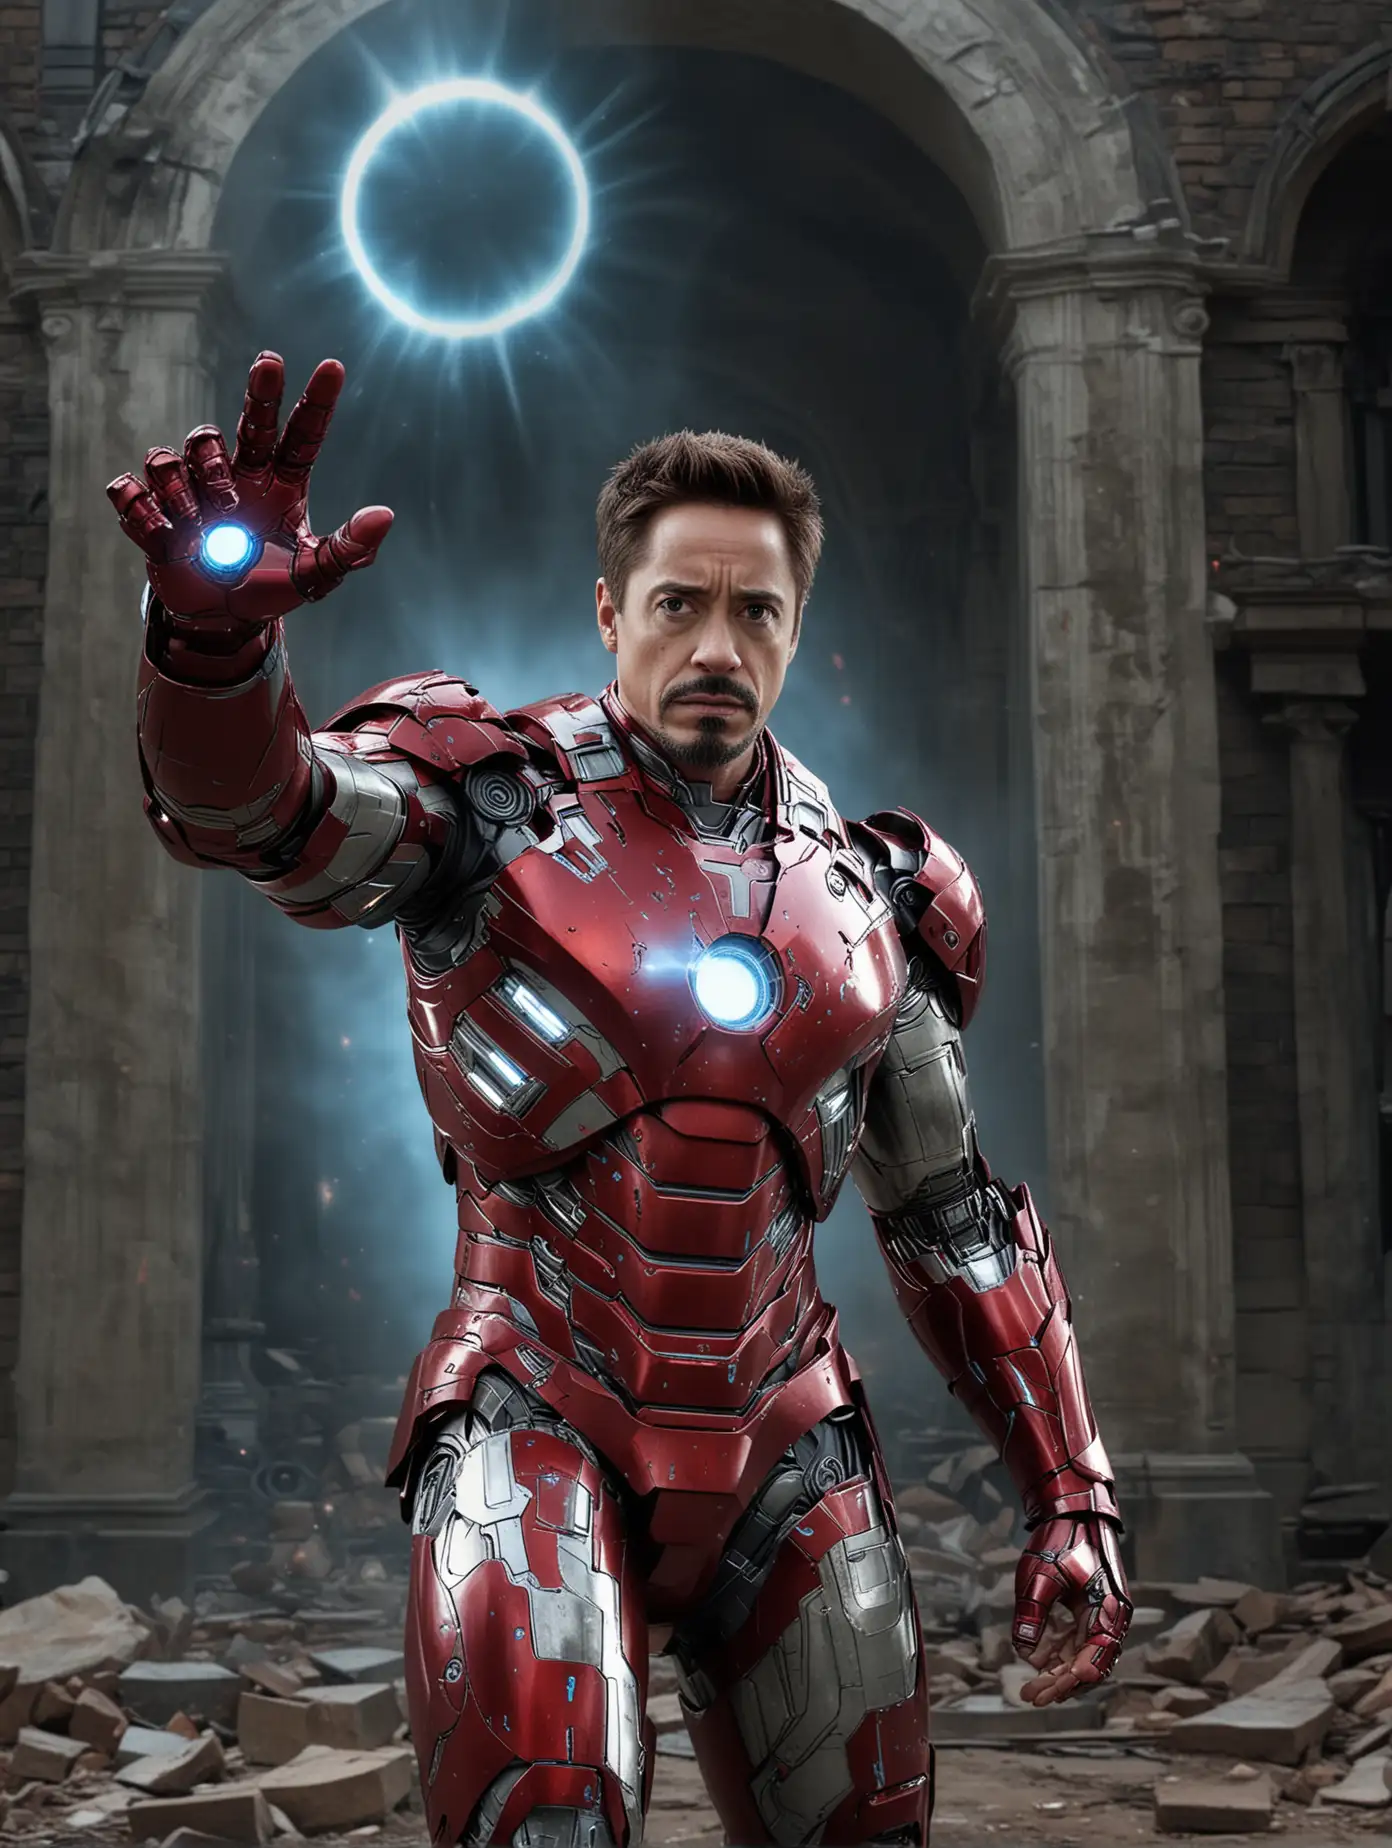 Photo of Robert Downey Jr. as Iron Man, wearing red and silver armor with a blue glowing circle on his chest, the ruins of a building. He reaches his hand toward the camera, pointing one finger upward, showing a white circular light emanating from that finger. Marvel Studios Style